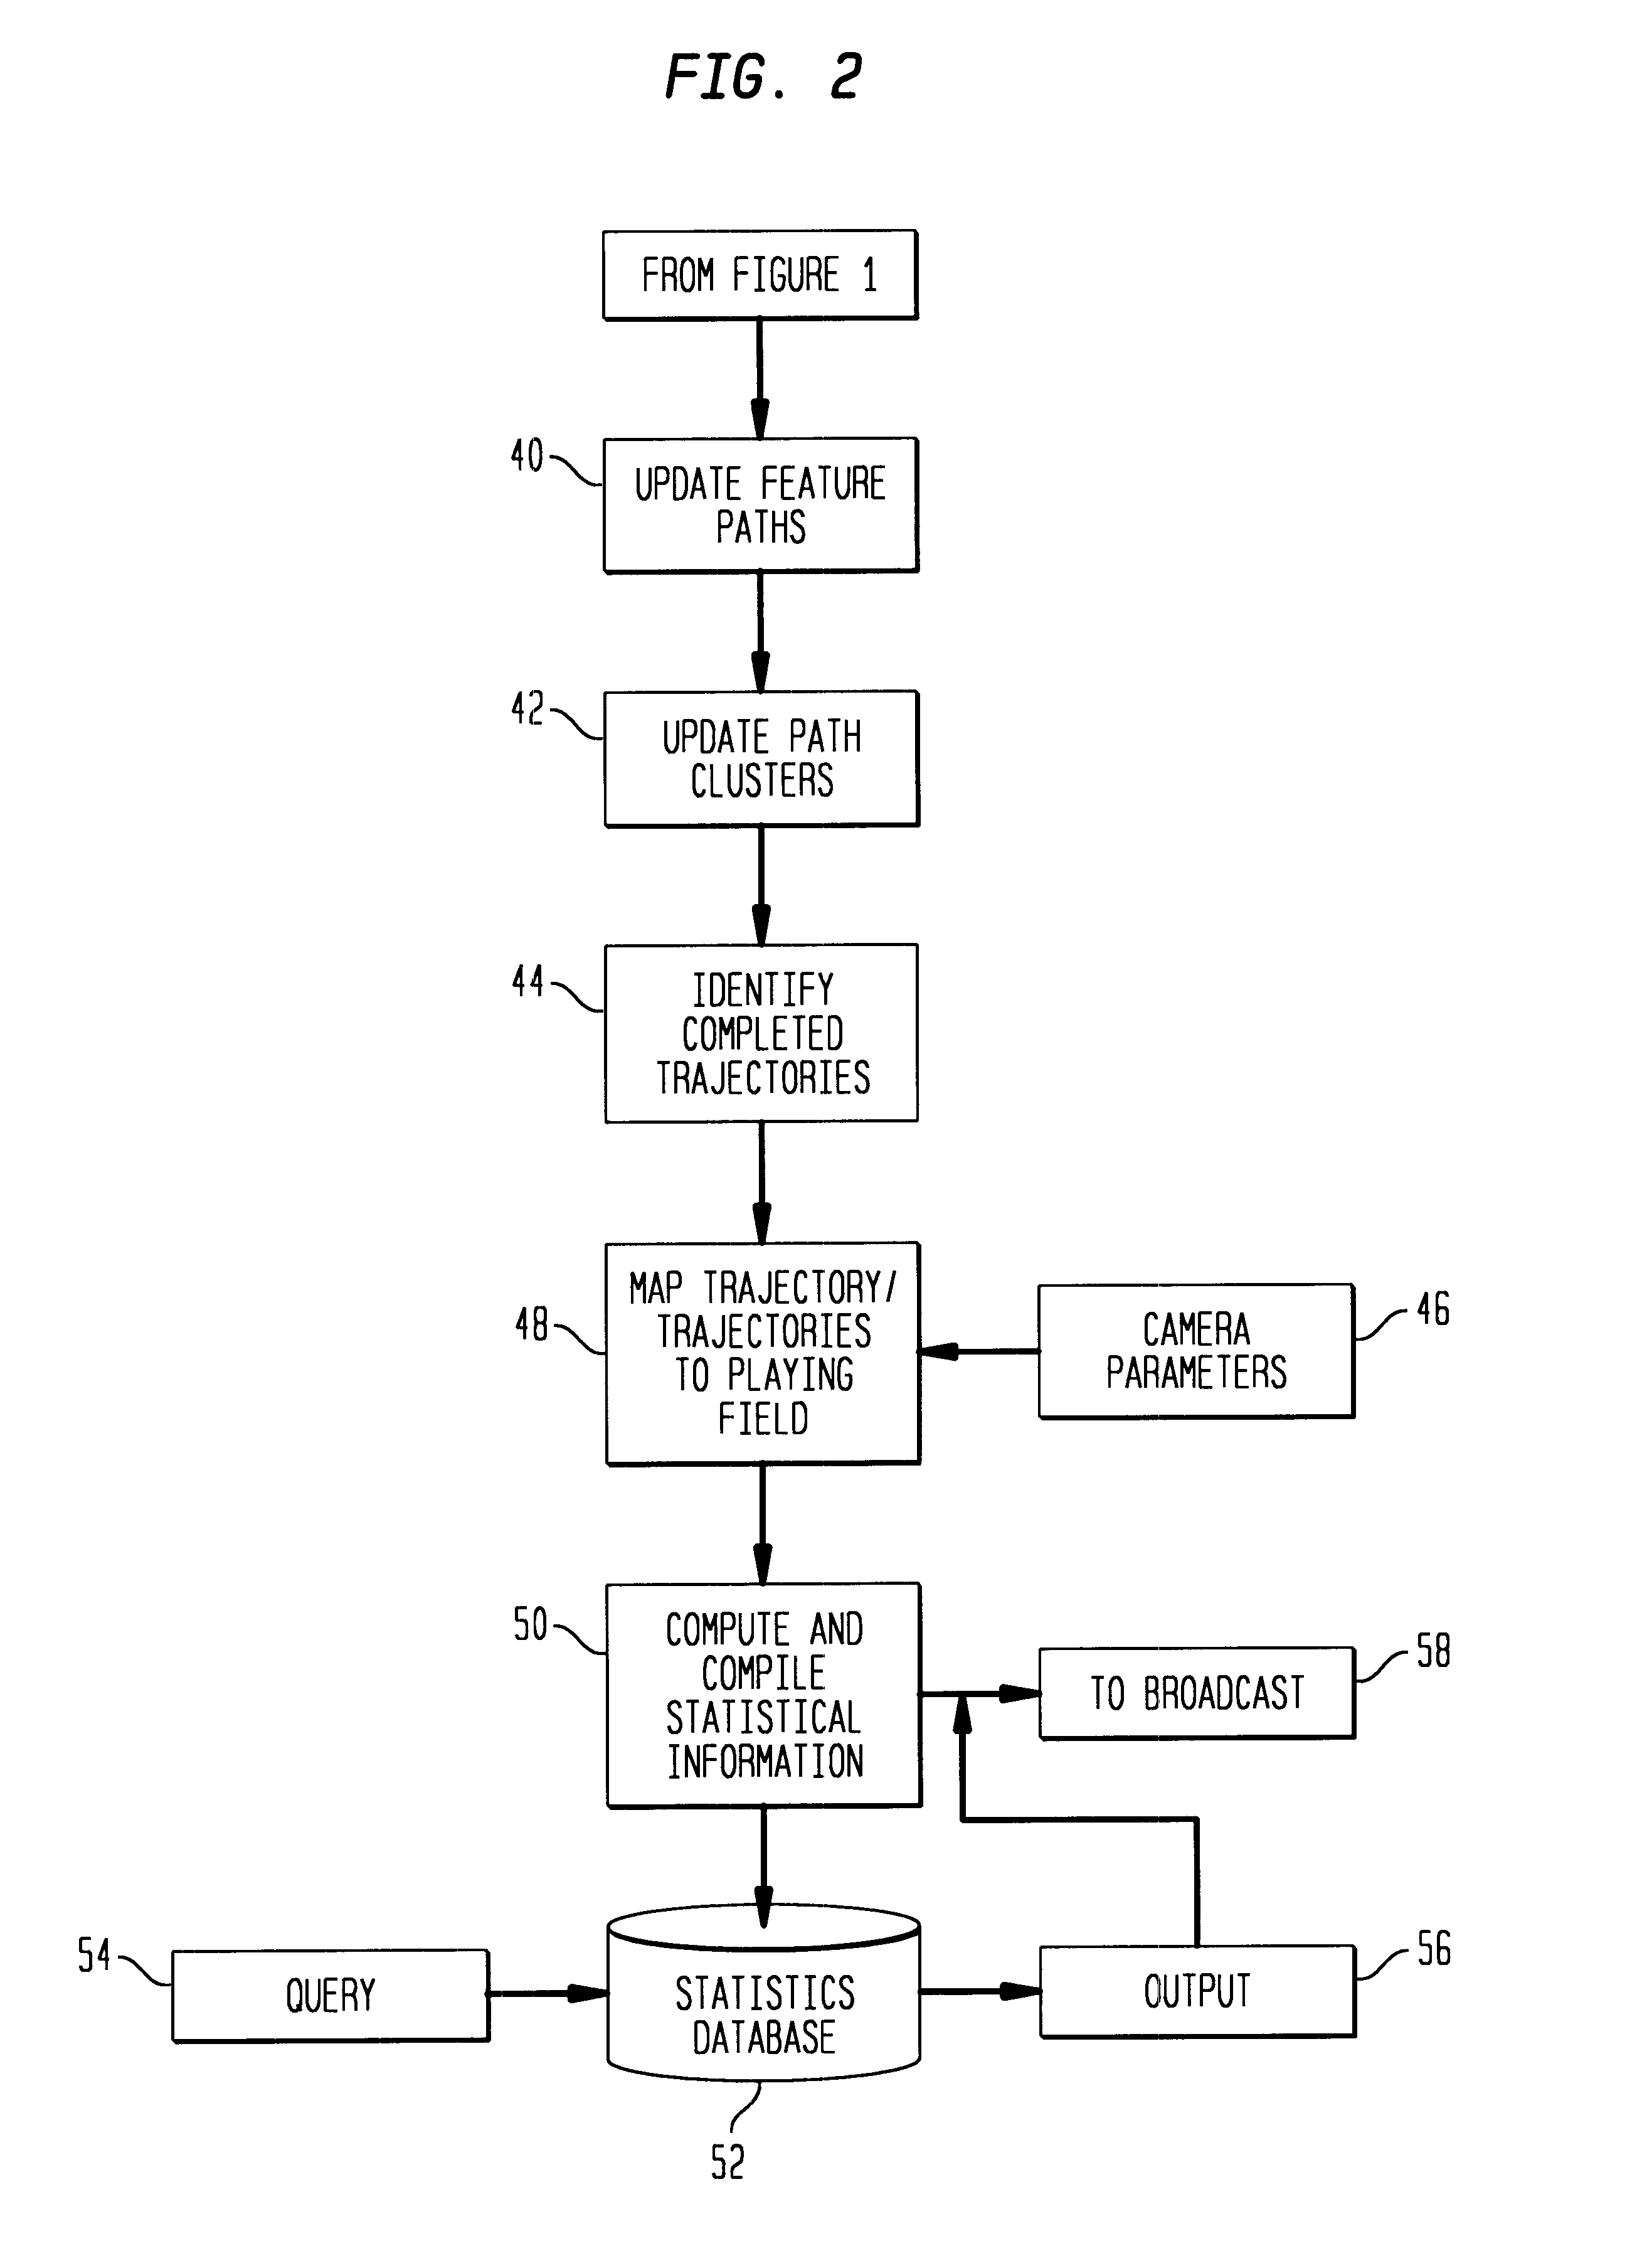 Method and apparatus for deriving novel sports statistics from real time tracking of sporting events